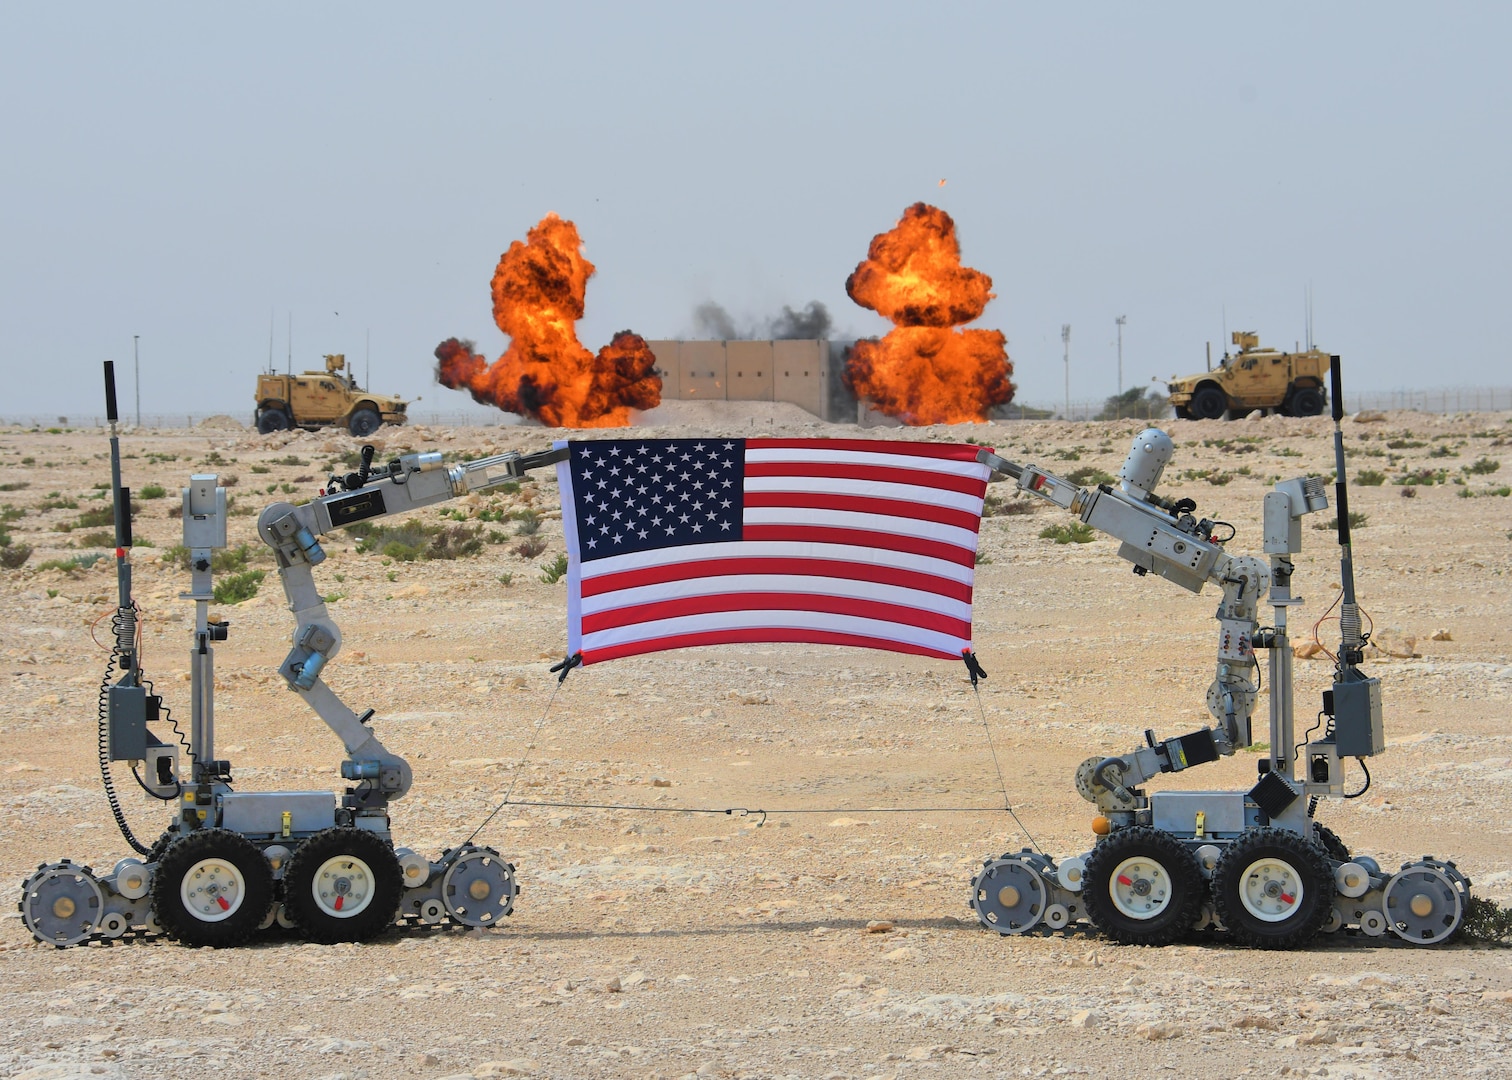 Two “fireball” charges go off behind a U.S. flag being held by F6A bomb disposal robots at Al Udeid Air Base, Qatar, March 17, 2017. The 379th Expeditionary Civil Engineer Squadron Explosive Ordnance Flight set off several rounds of explosives to mark the grand opening of their new EOD range at Al Udeid. (U.S. Air Force photo by Senior Airman Miles Wilson)